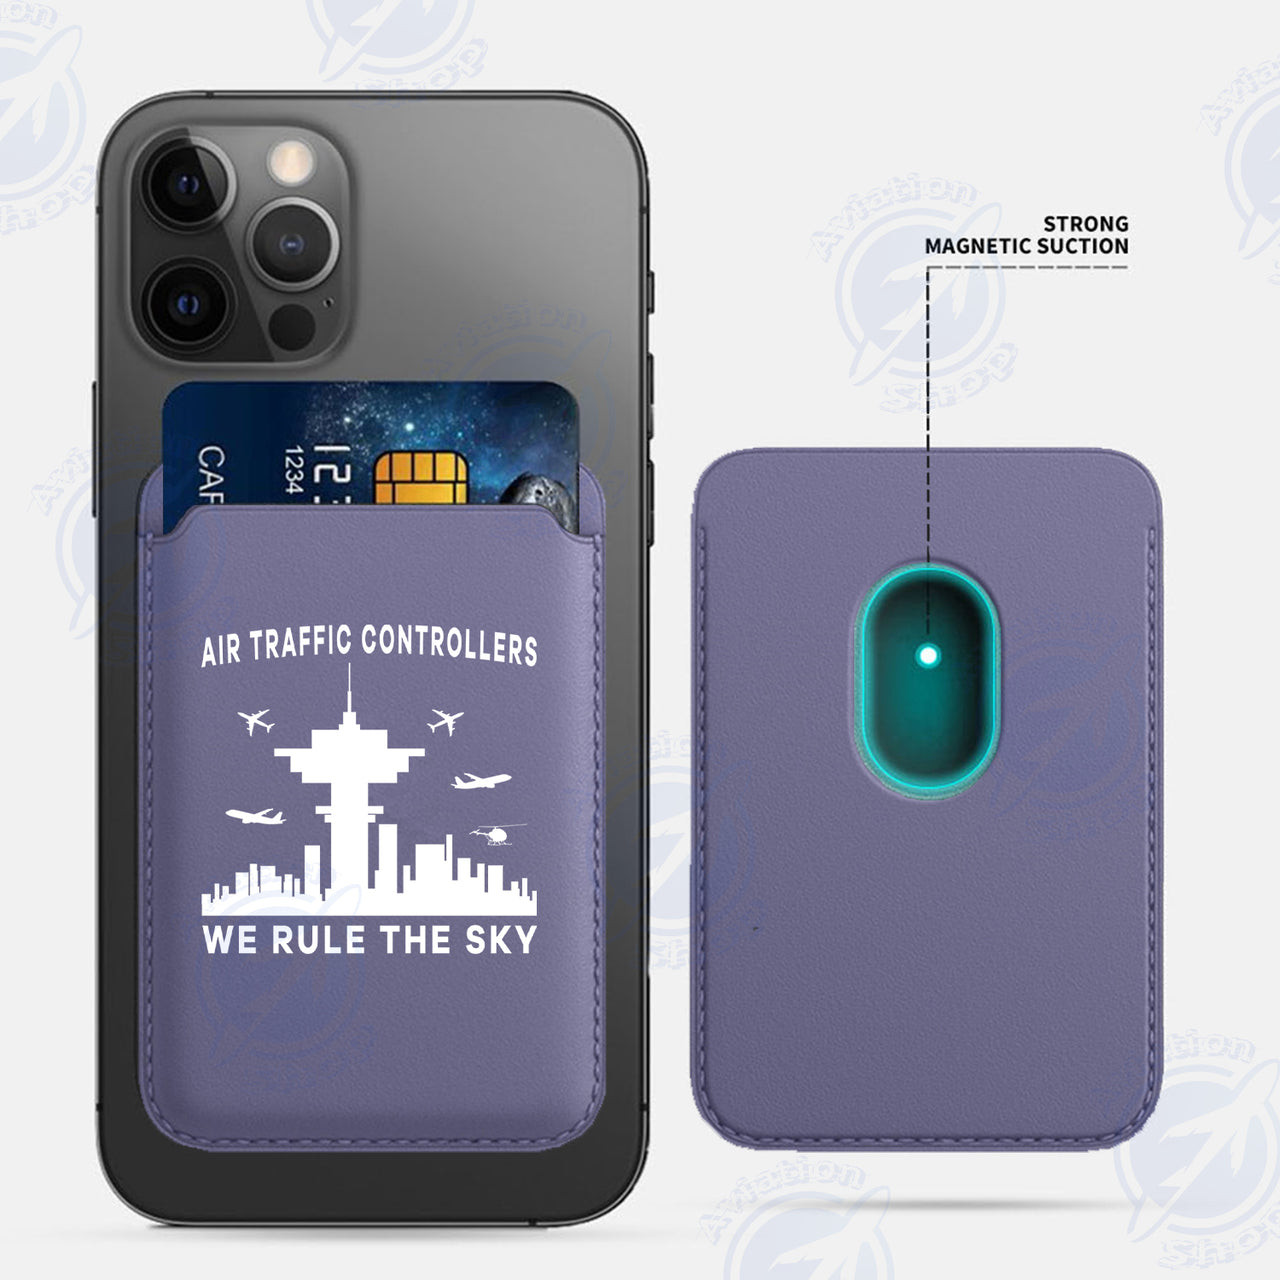 Air Traffic Controllers - We Rule The Sky iPhone Cases Magnetic Card Wallet